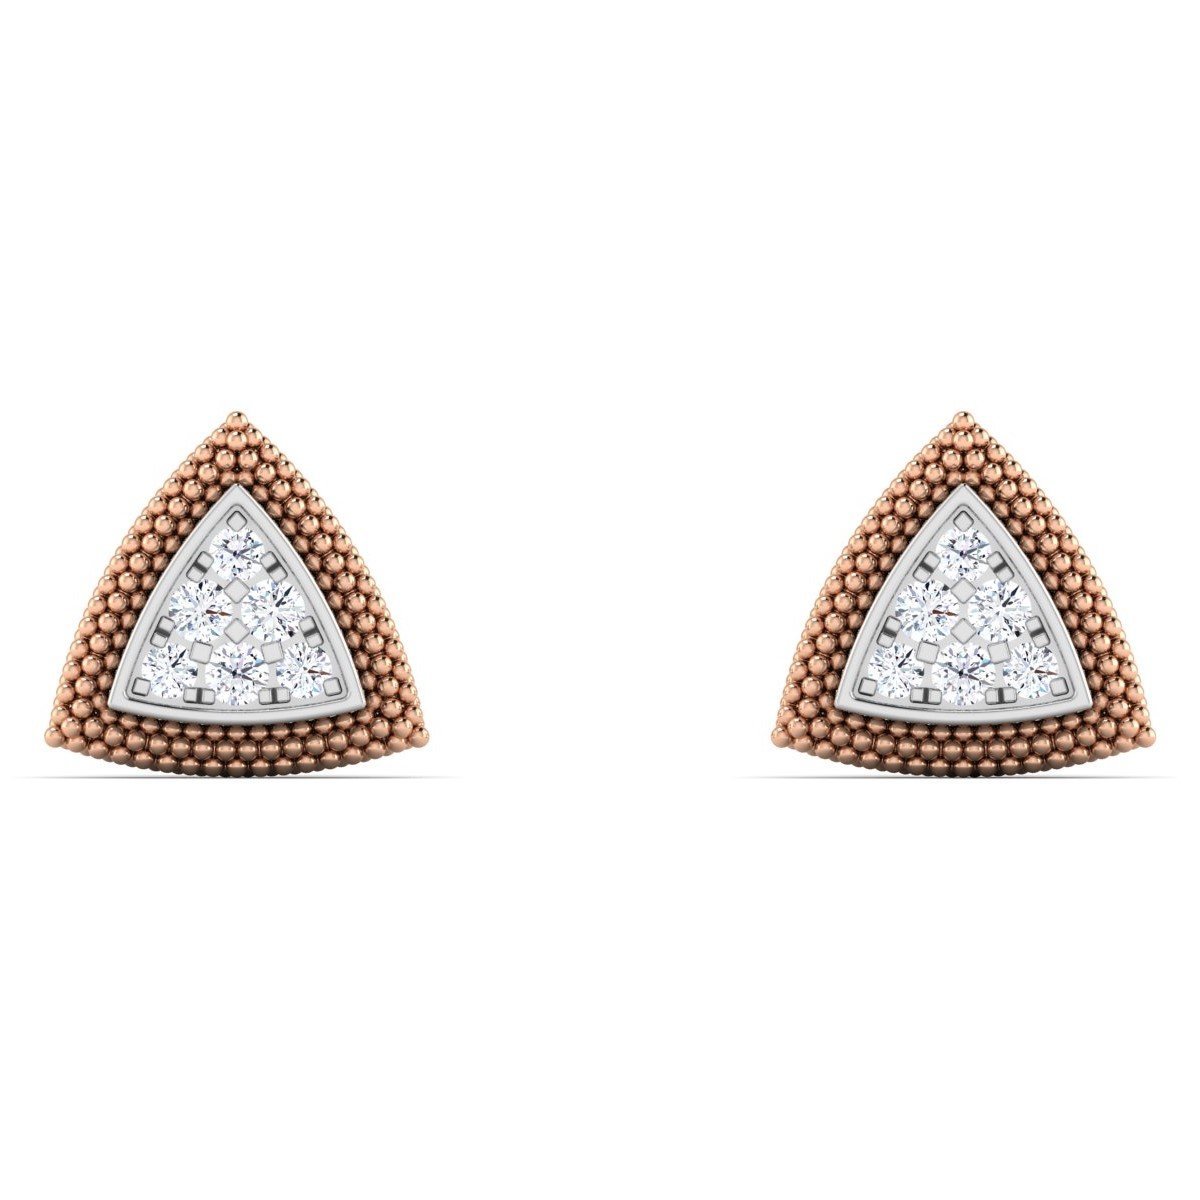 Top 5 Diamond Earrings For Women | Ouros Jewels